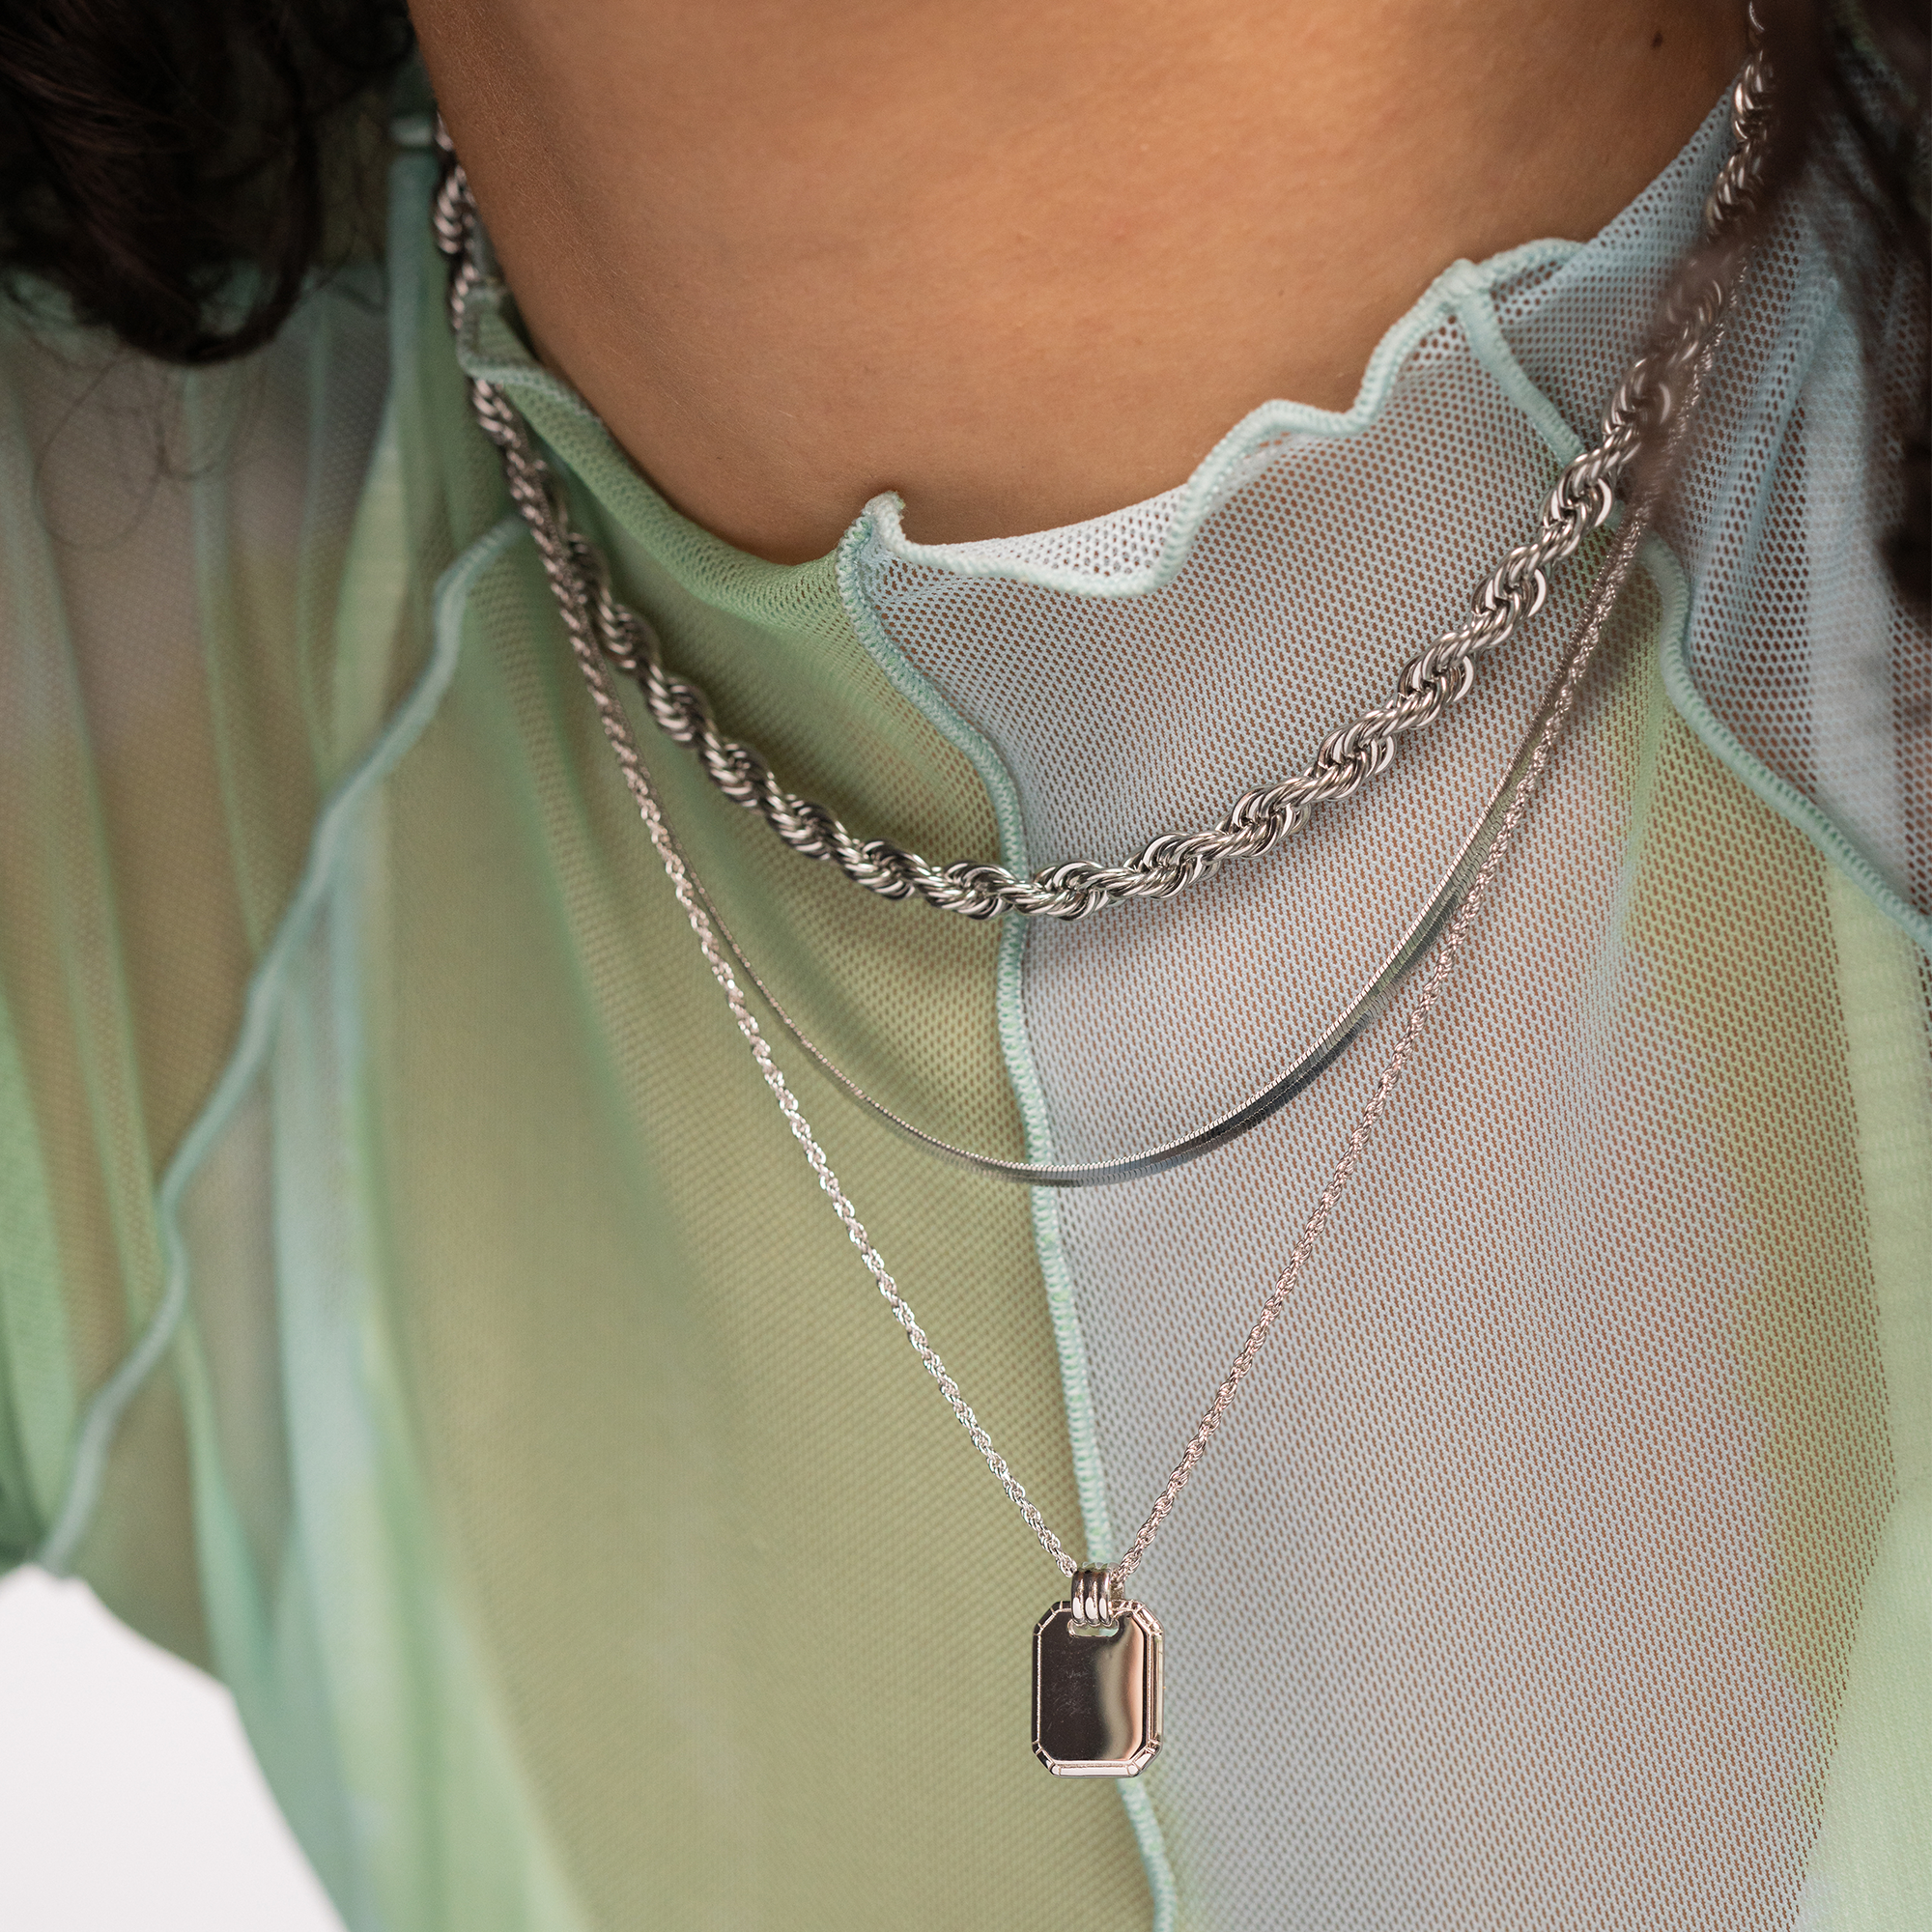 Functional Lock Pendant Necklace in 925 Sterling Silver, Engravable Necklace Nickel Free